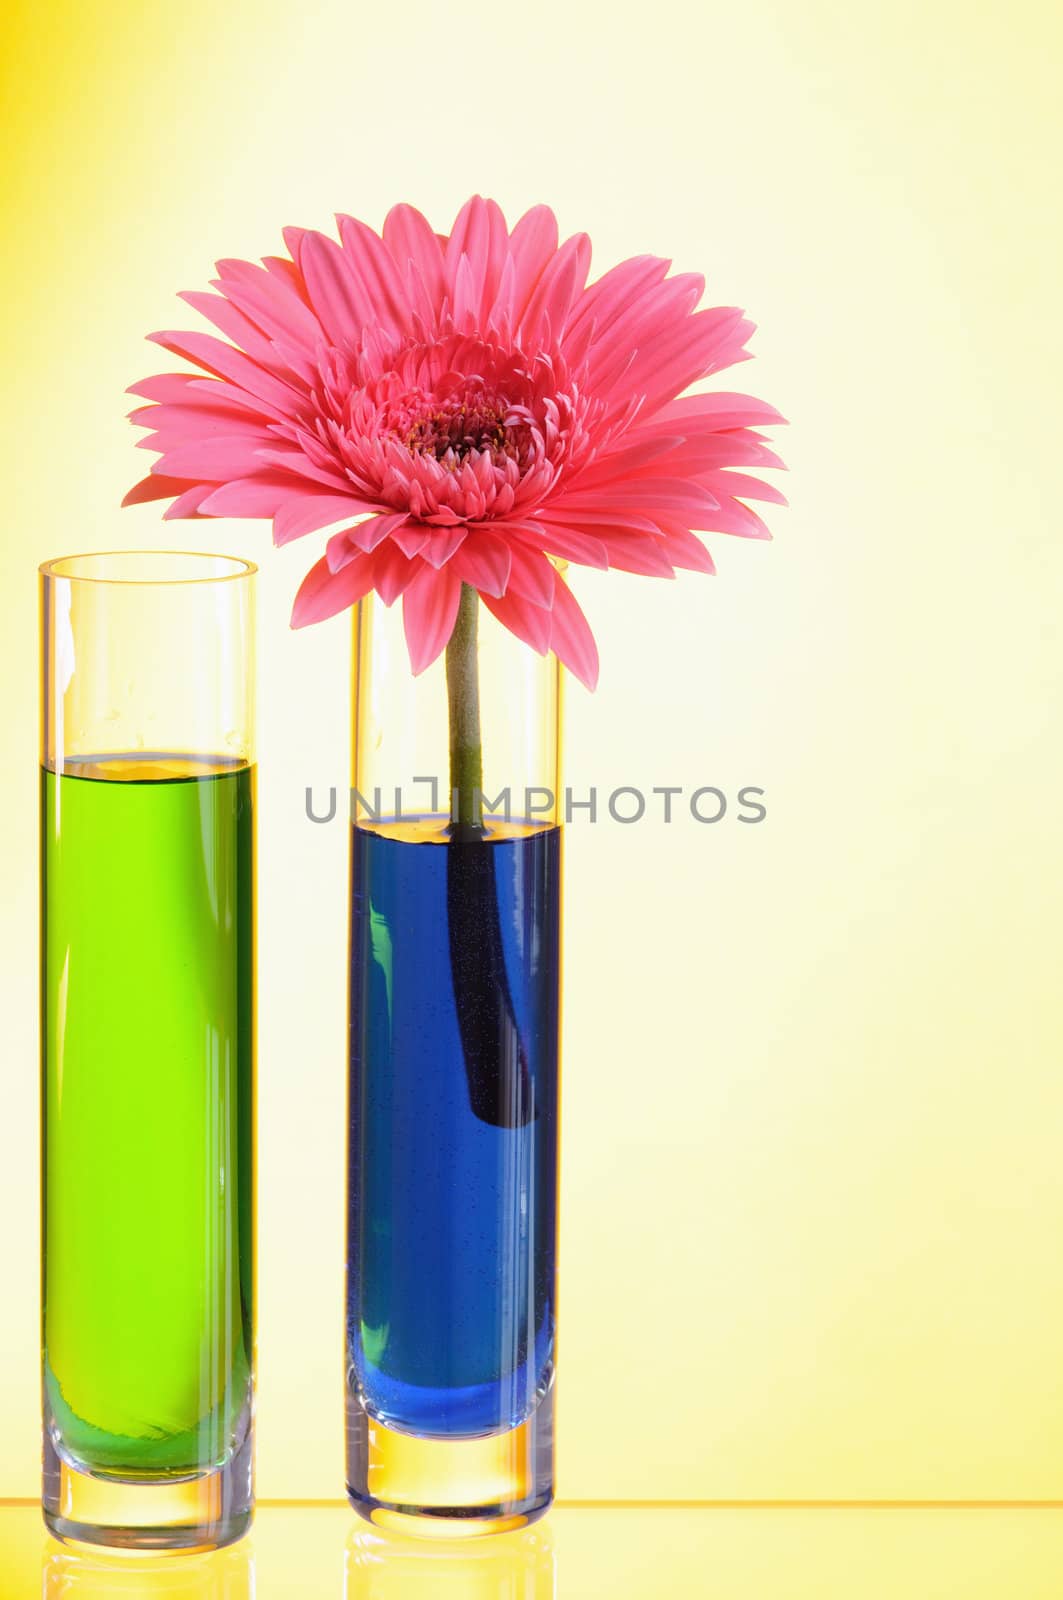 Vases with multi-coloured water on yellow background